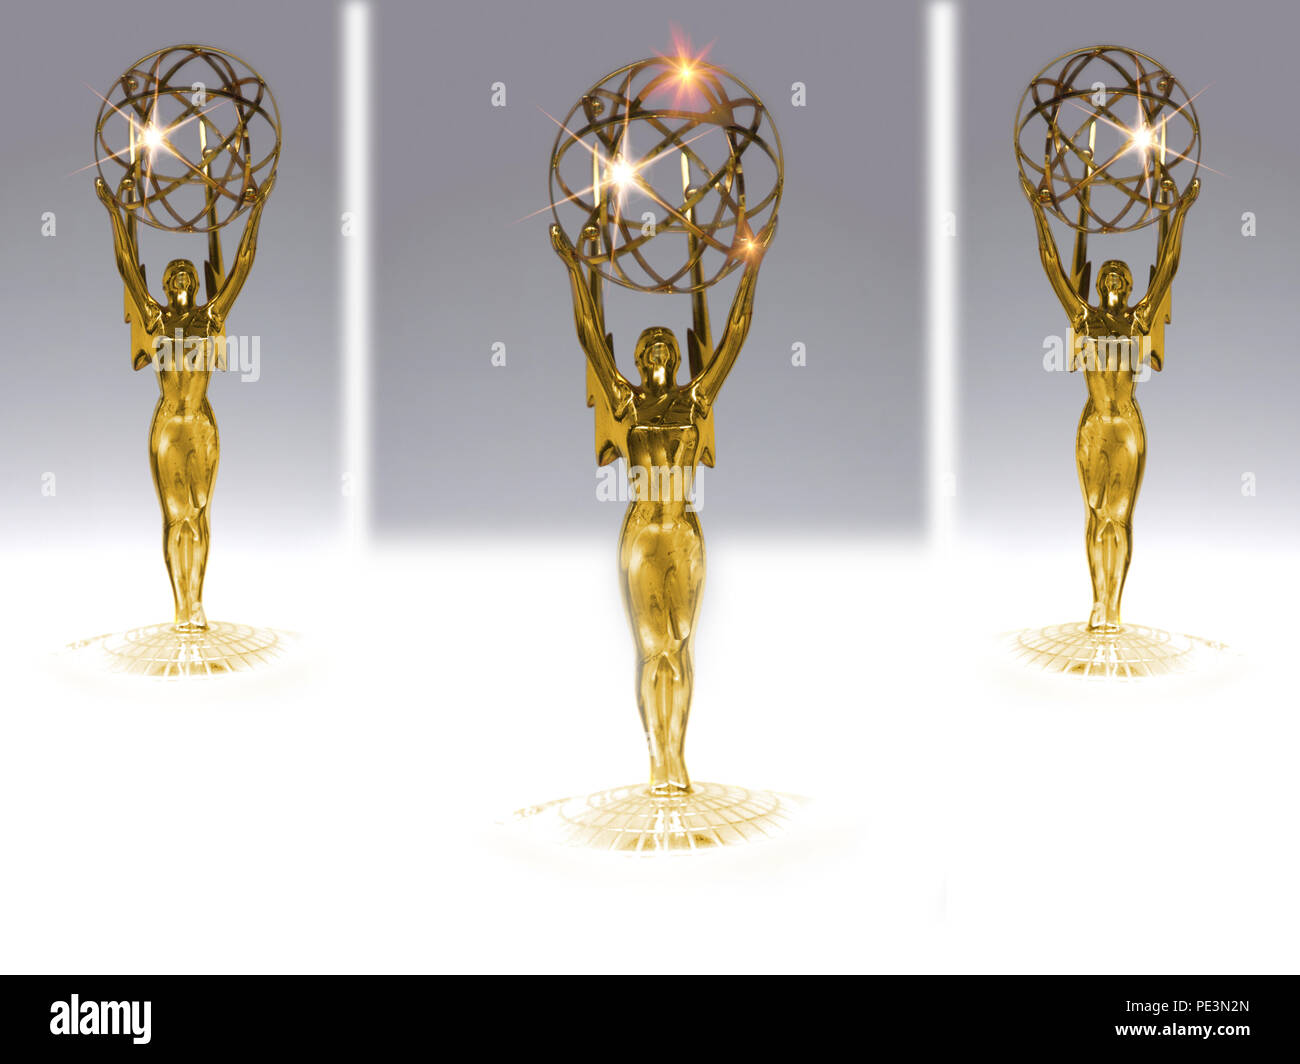 Abstract photo of 3 Emmy TV and Film awards Stock Photo